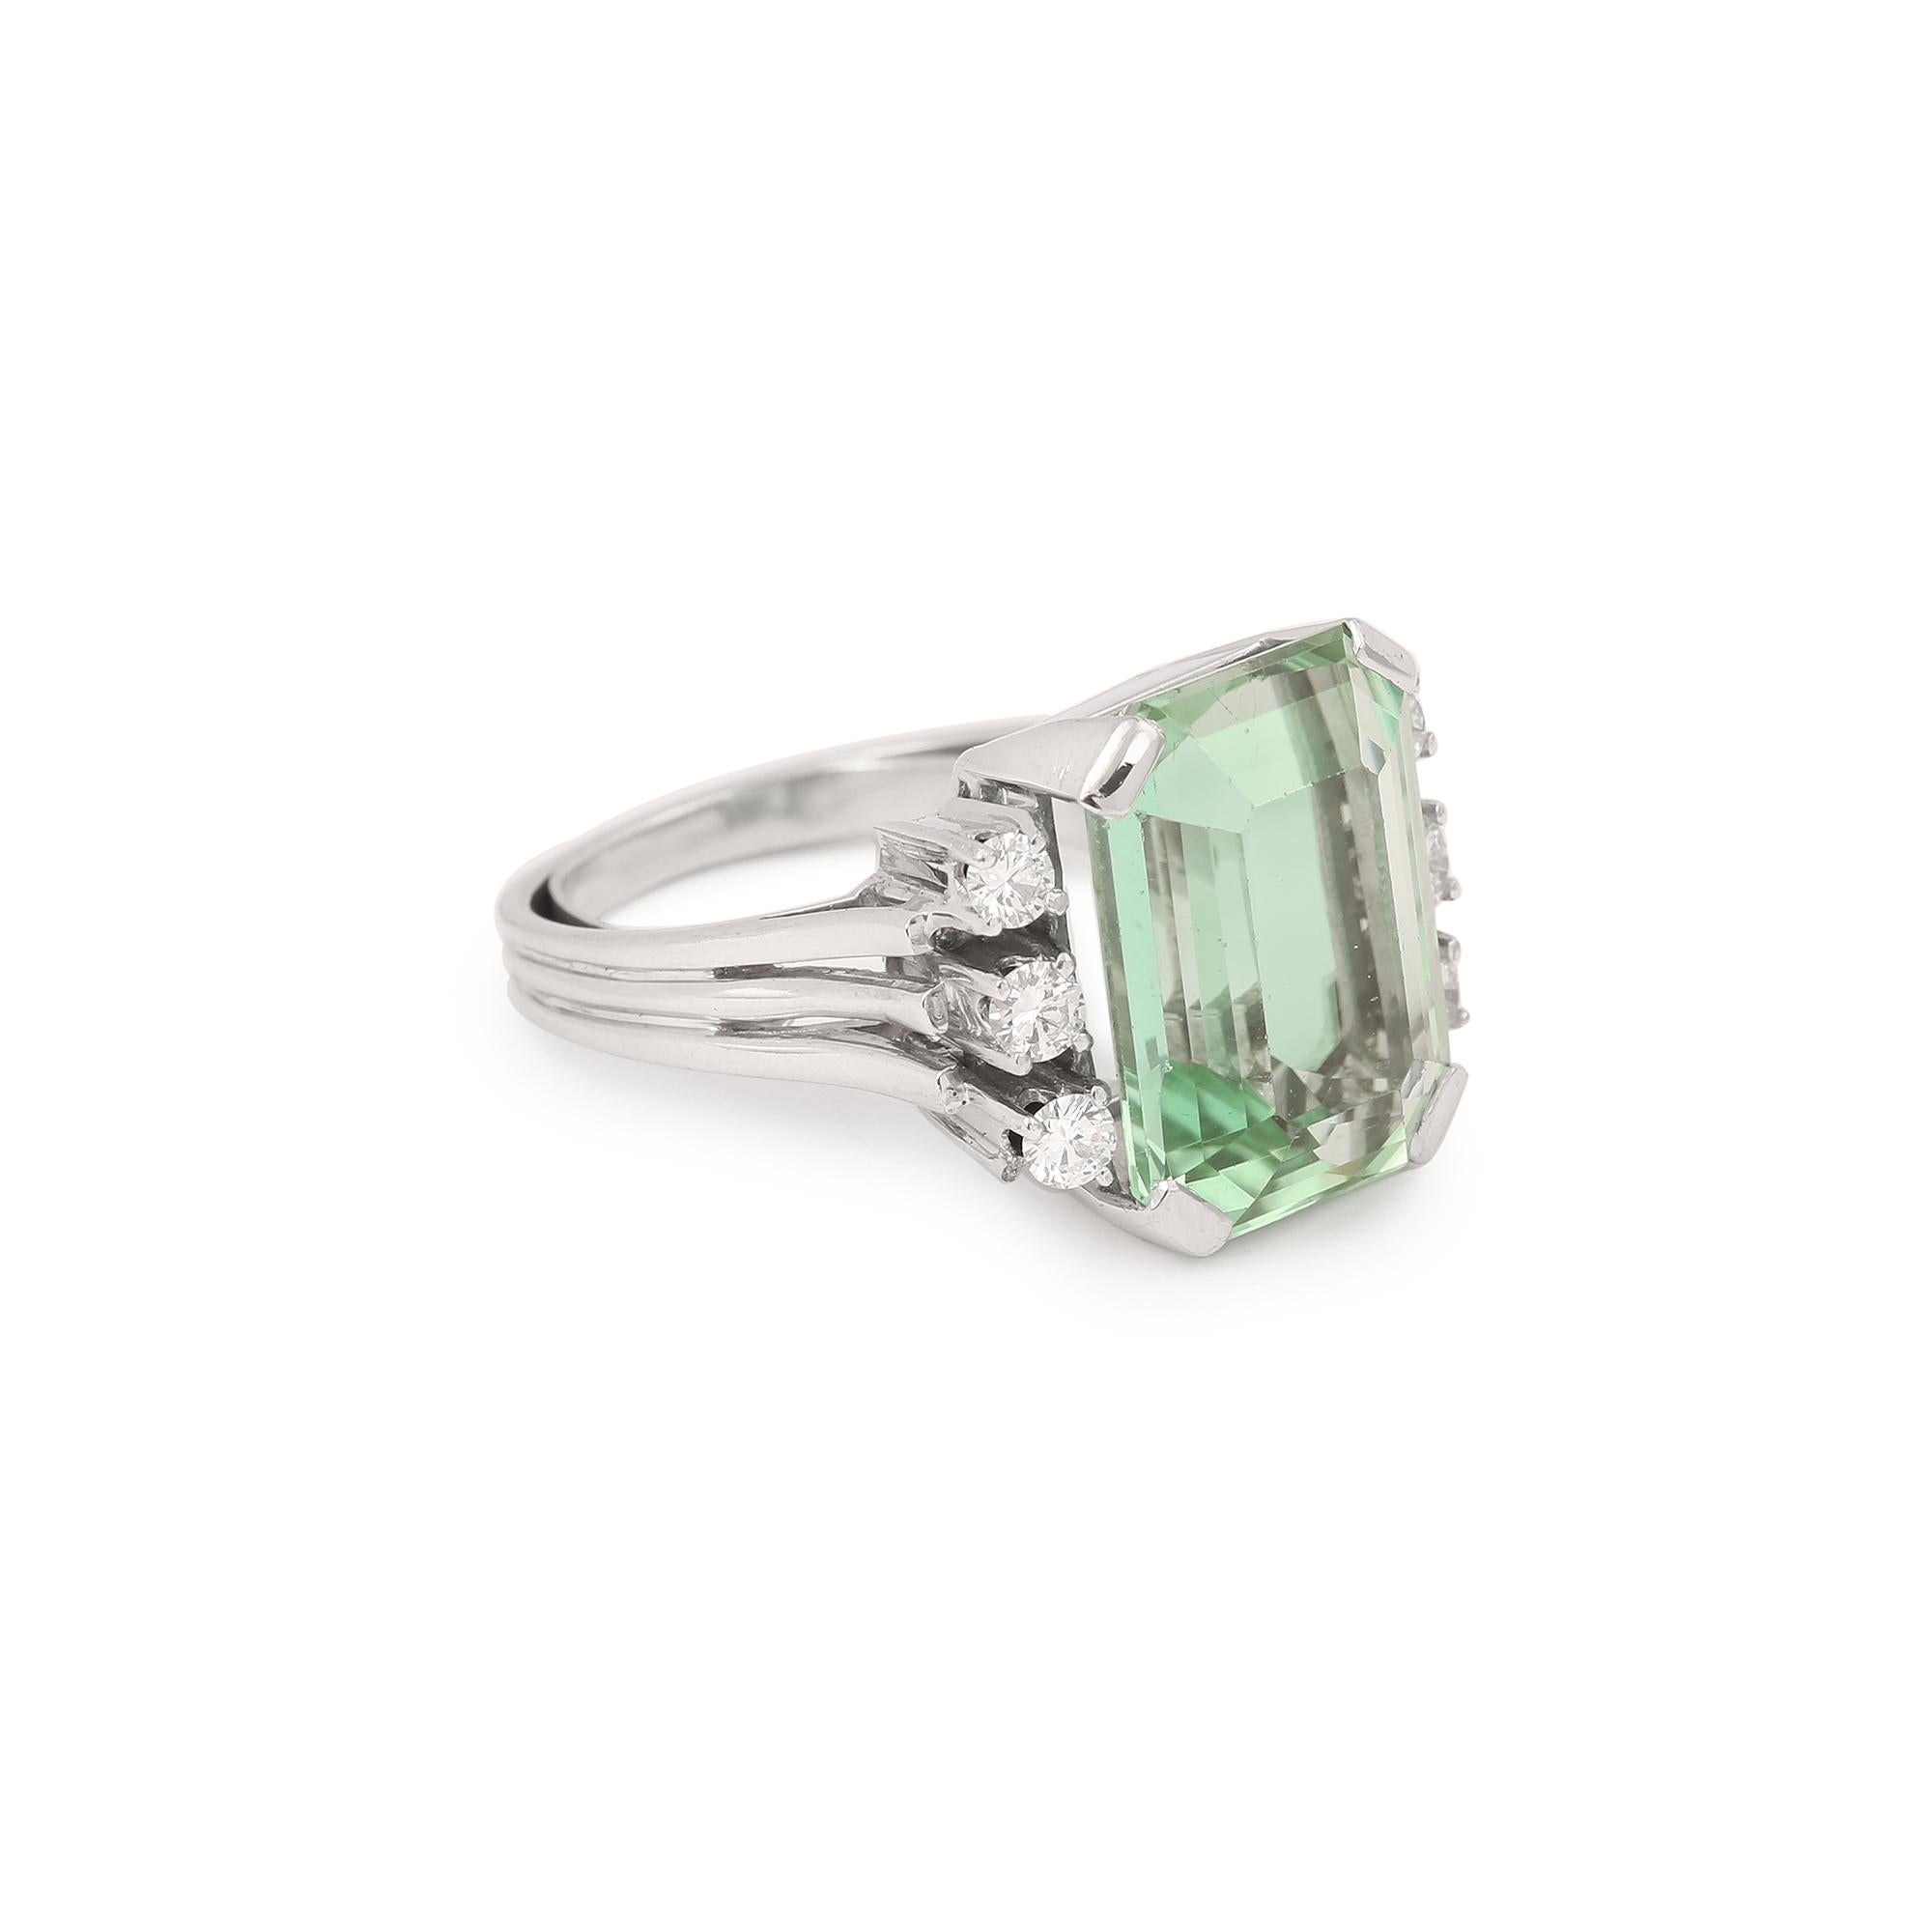 Vintage white gold ring set with a beautiful 9.17 carat green rectangle tourmaline and 6 brilliant cut diamonds. The tourmaline is exceptional for its colour and purity.

Weight of the Tourmaline: 9.17 Carats Very crystalline 